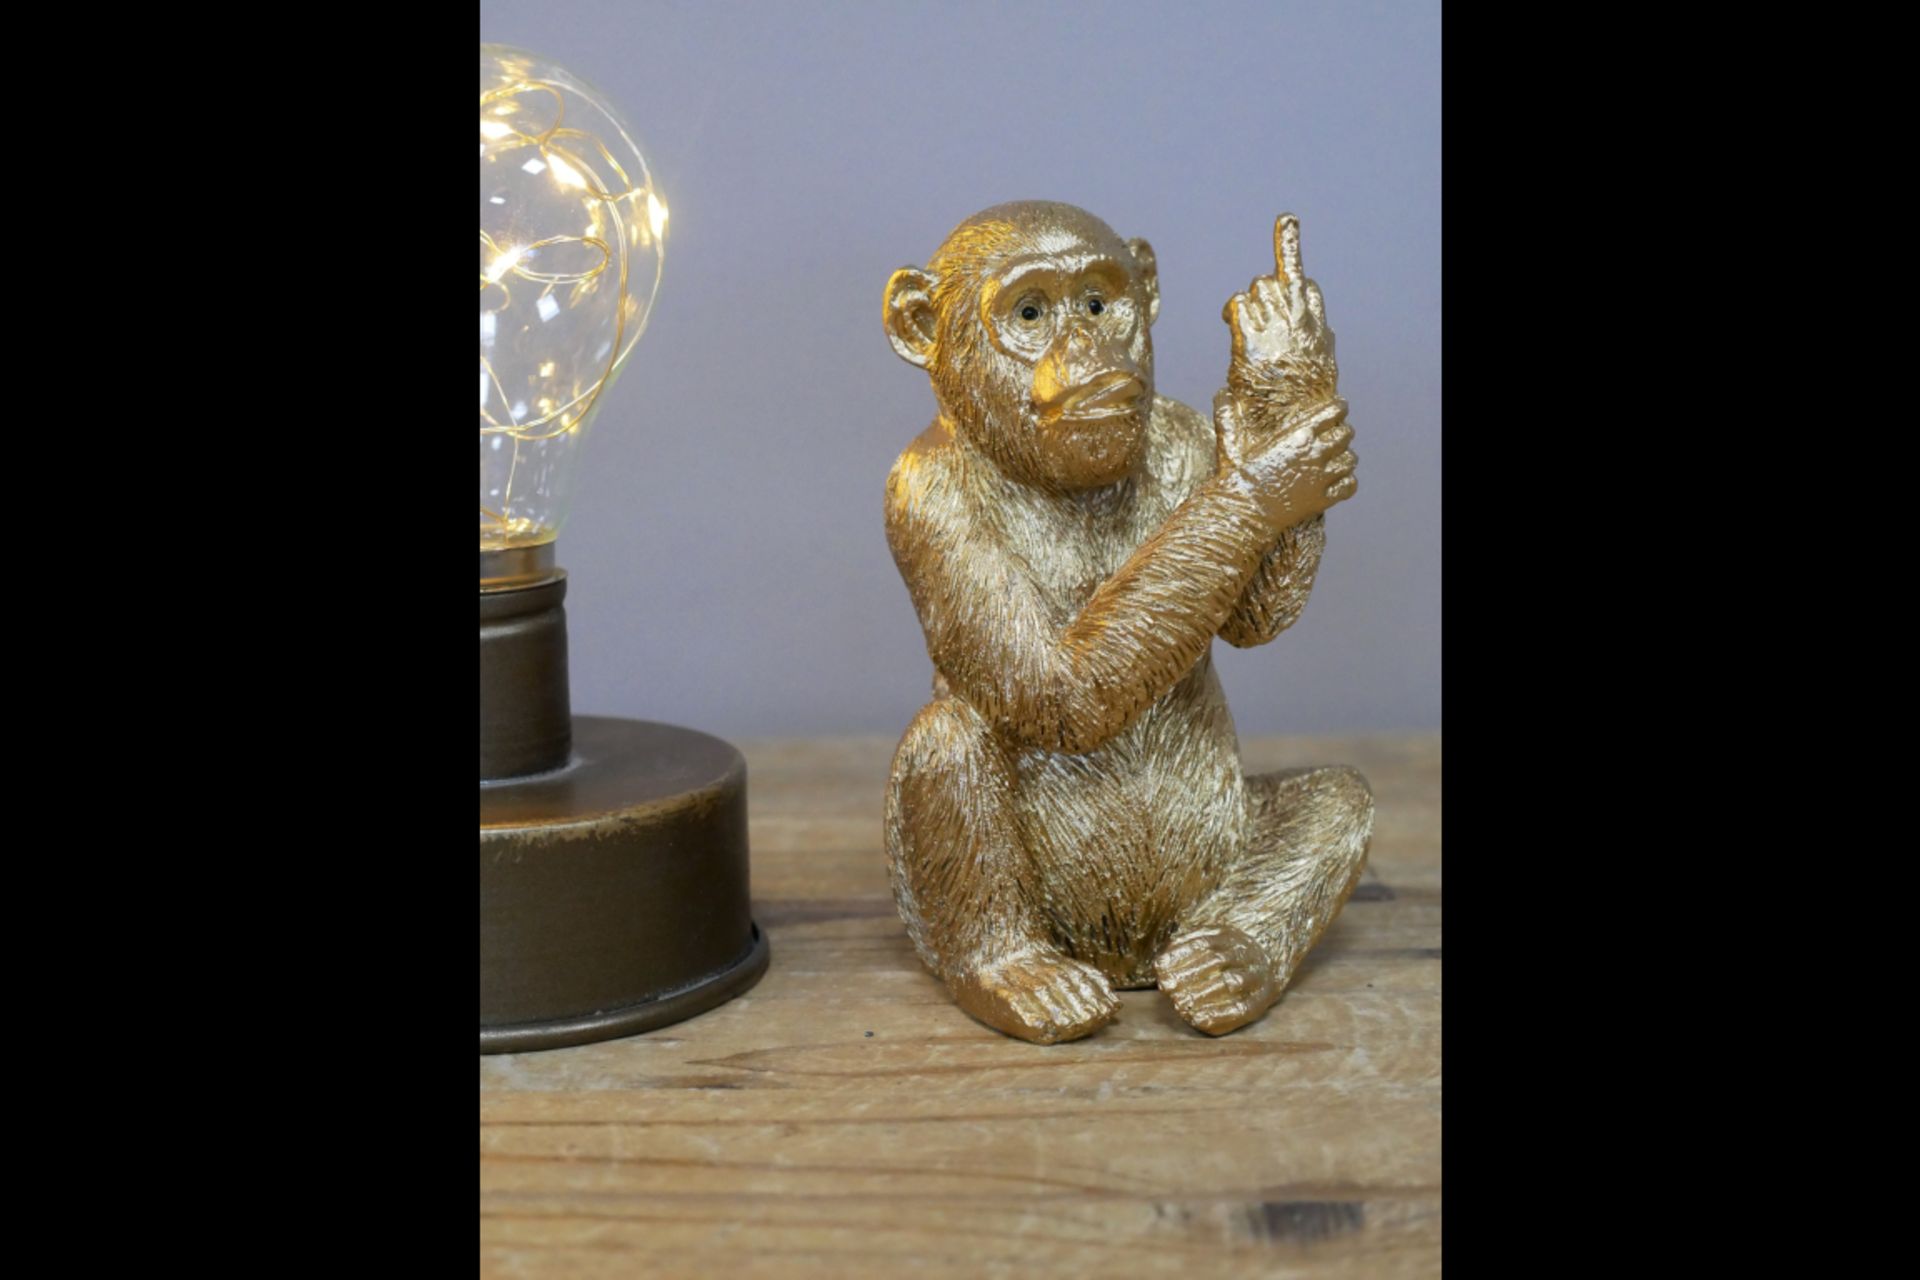 12x Small Naughty Monkey Ornaments - Image 9 of 9